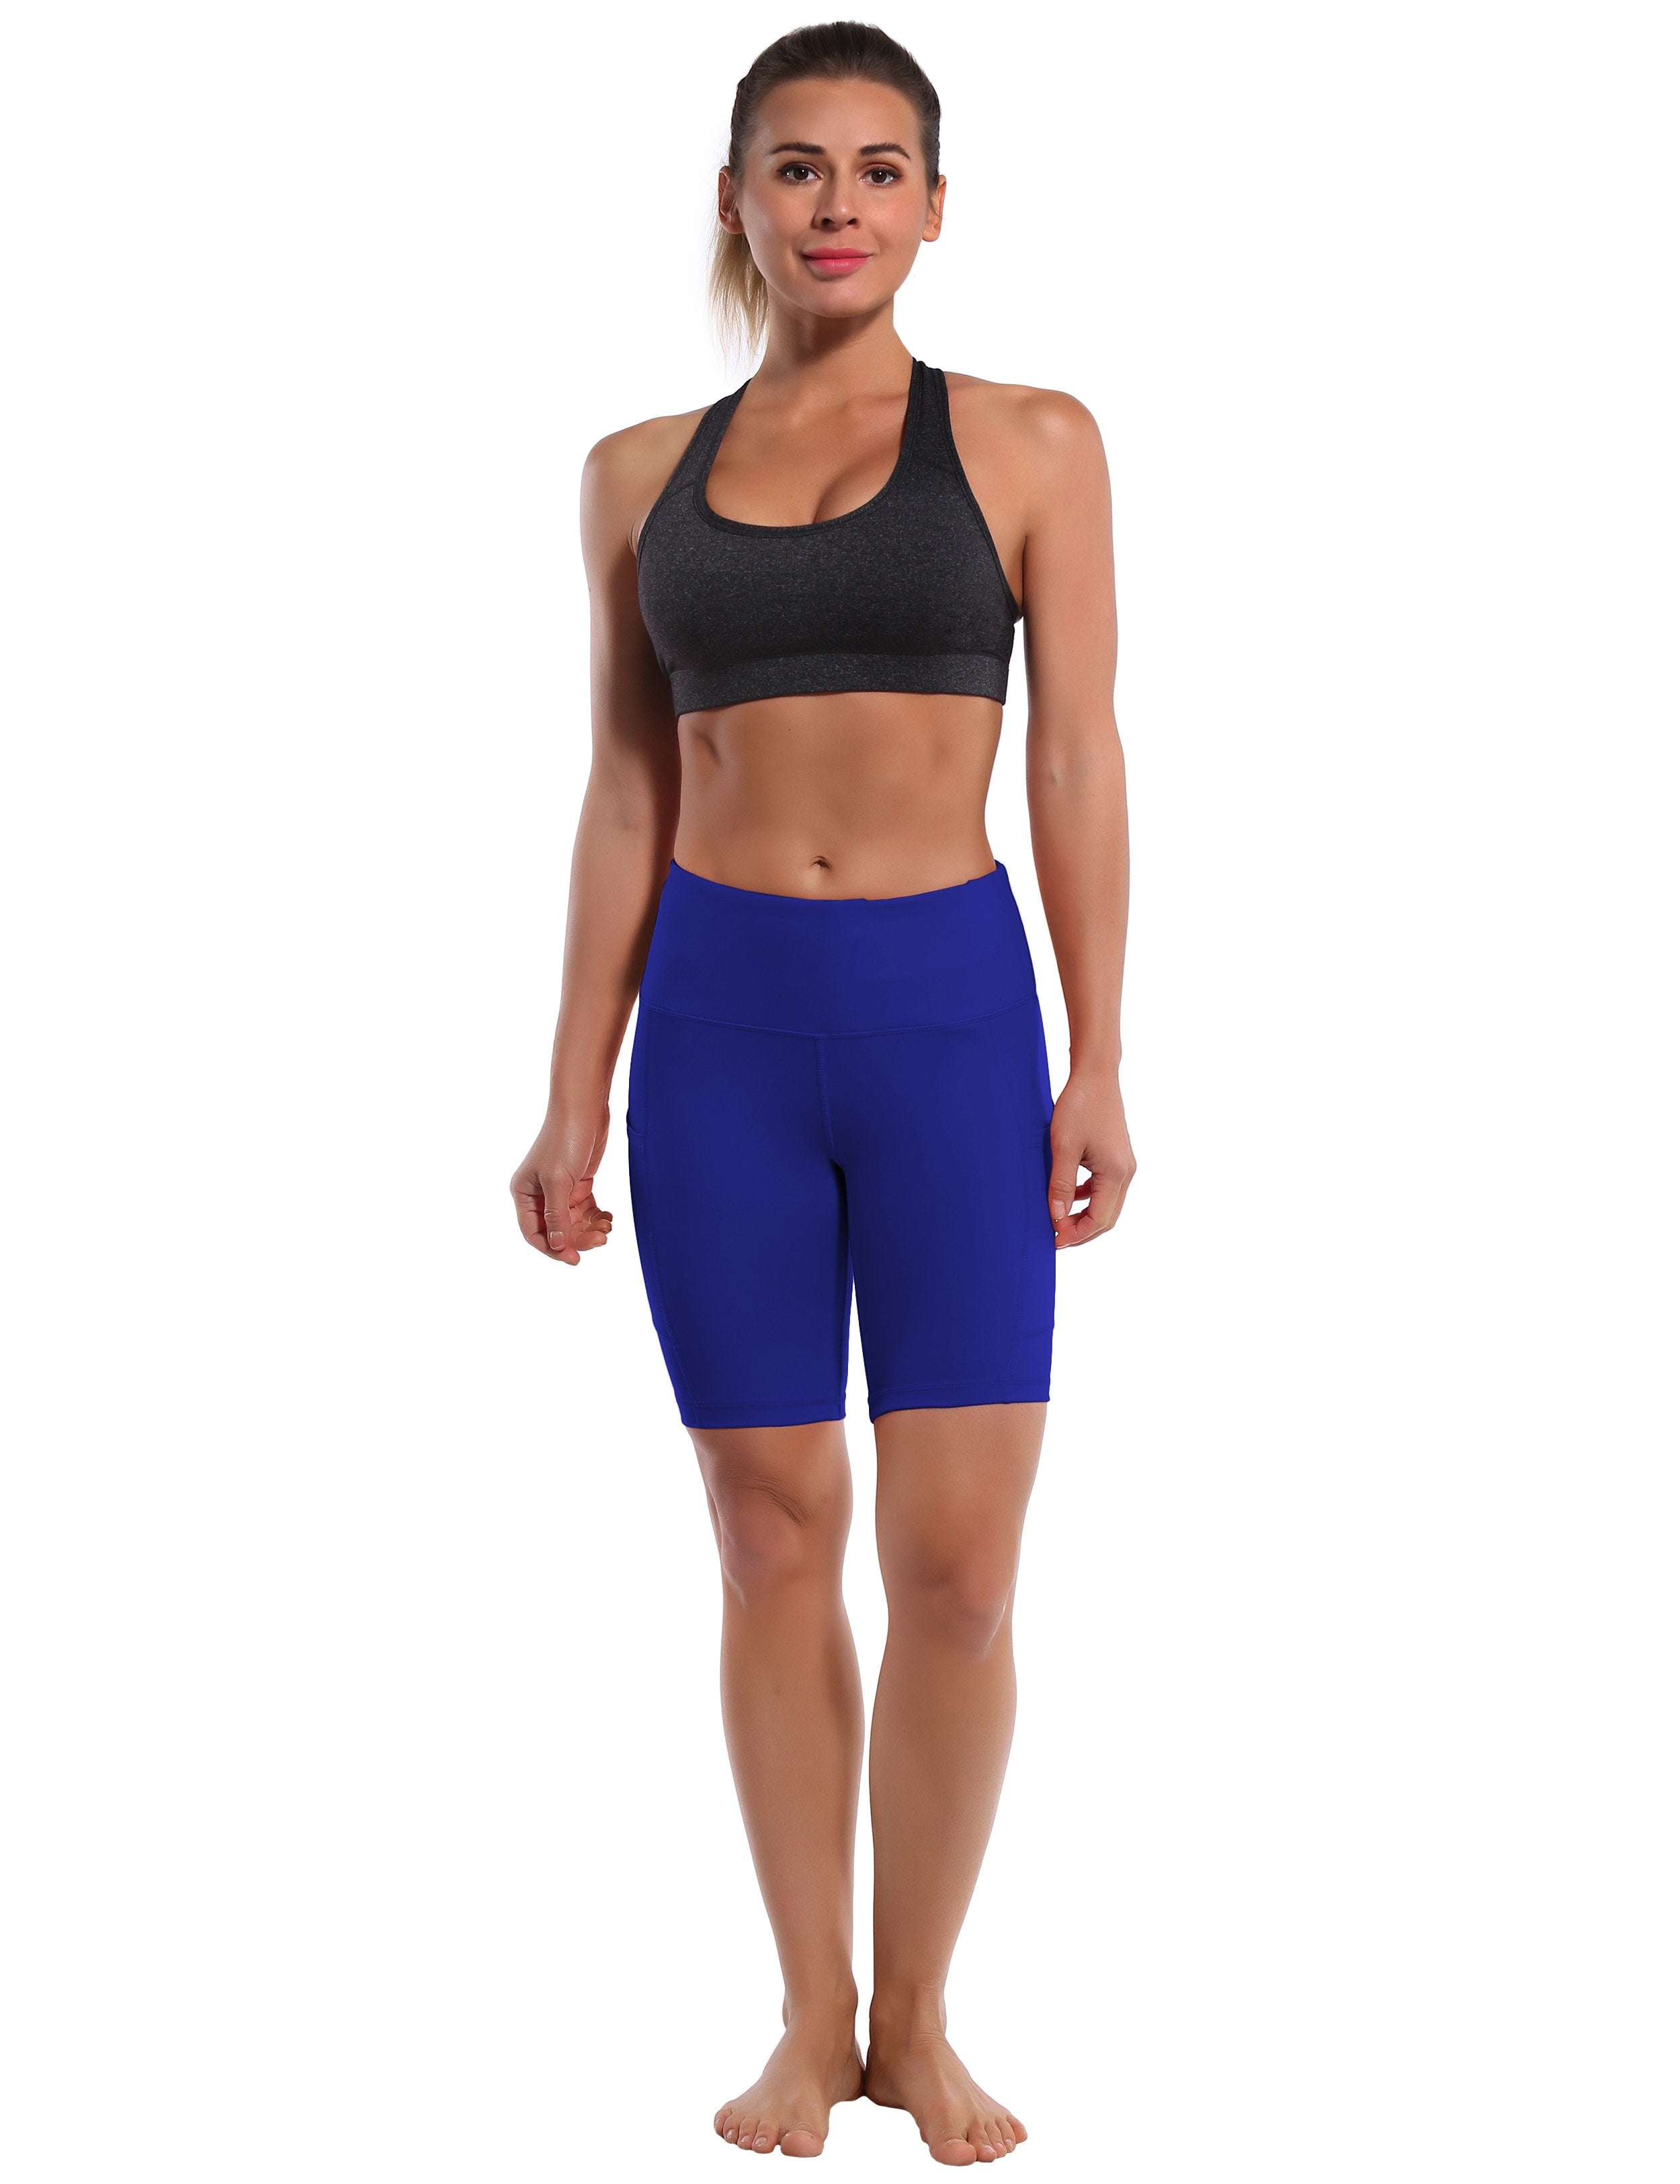 8" Side Pockets Yoga Shorts navy Sleek, soft, smooth and totally comfortable: our newest style is here. Softest-ever fabric High elasticity High density 4-way stretch Fabric doesn't attract lint easily No see-through Moisture-wicking Machine wash 75% Nylon, 25% Spandex